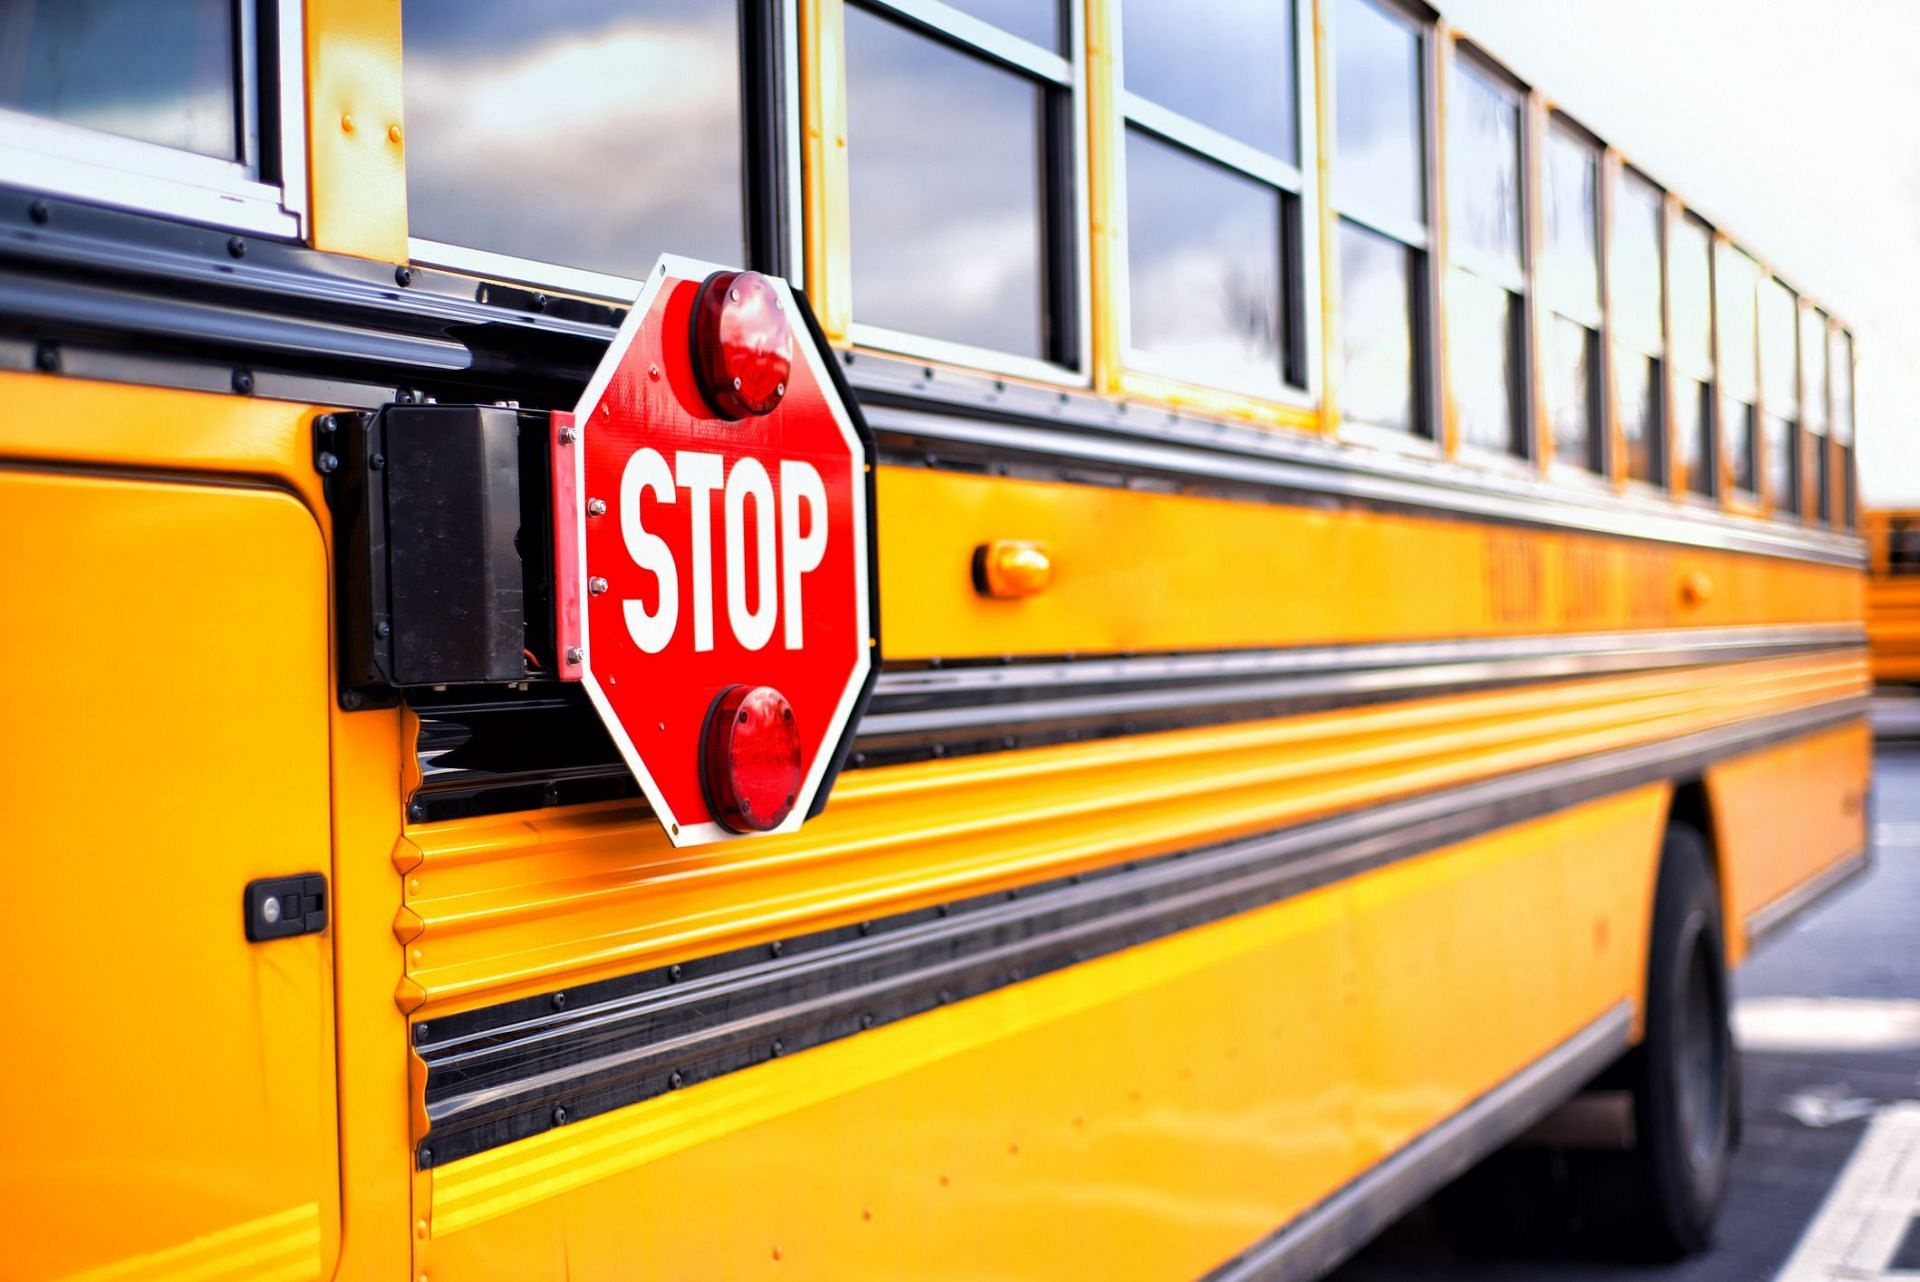 School bus driver goes viral for lashing out on students (Image via Getty Images)